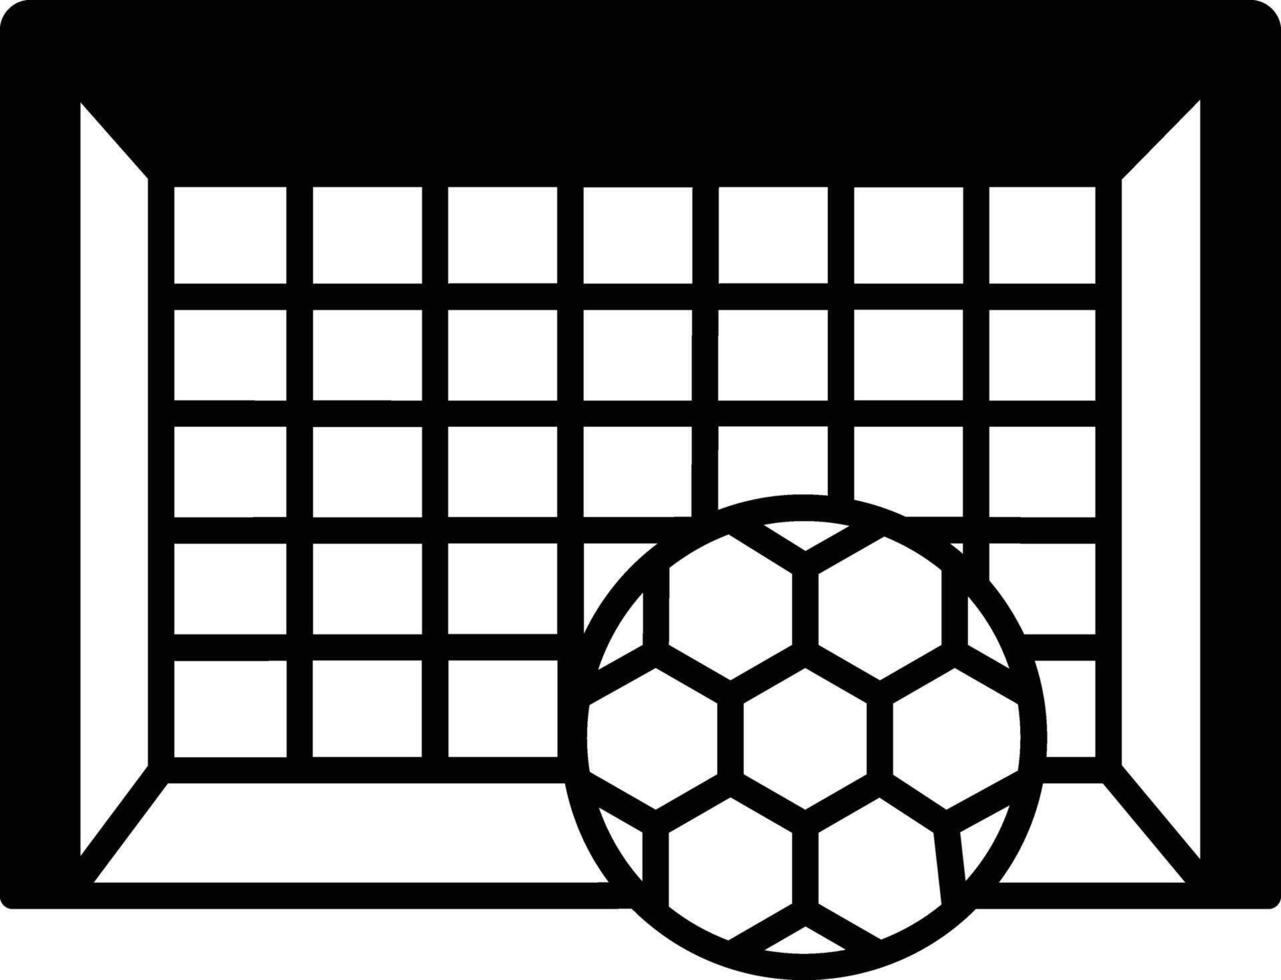 Soccer glyph and line vector illustration